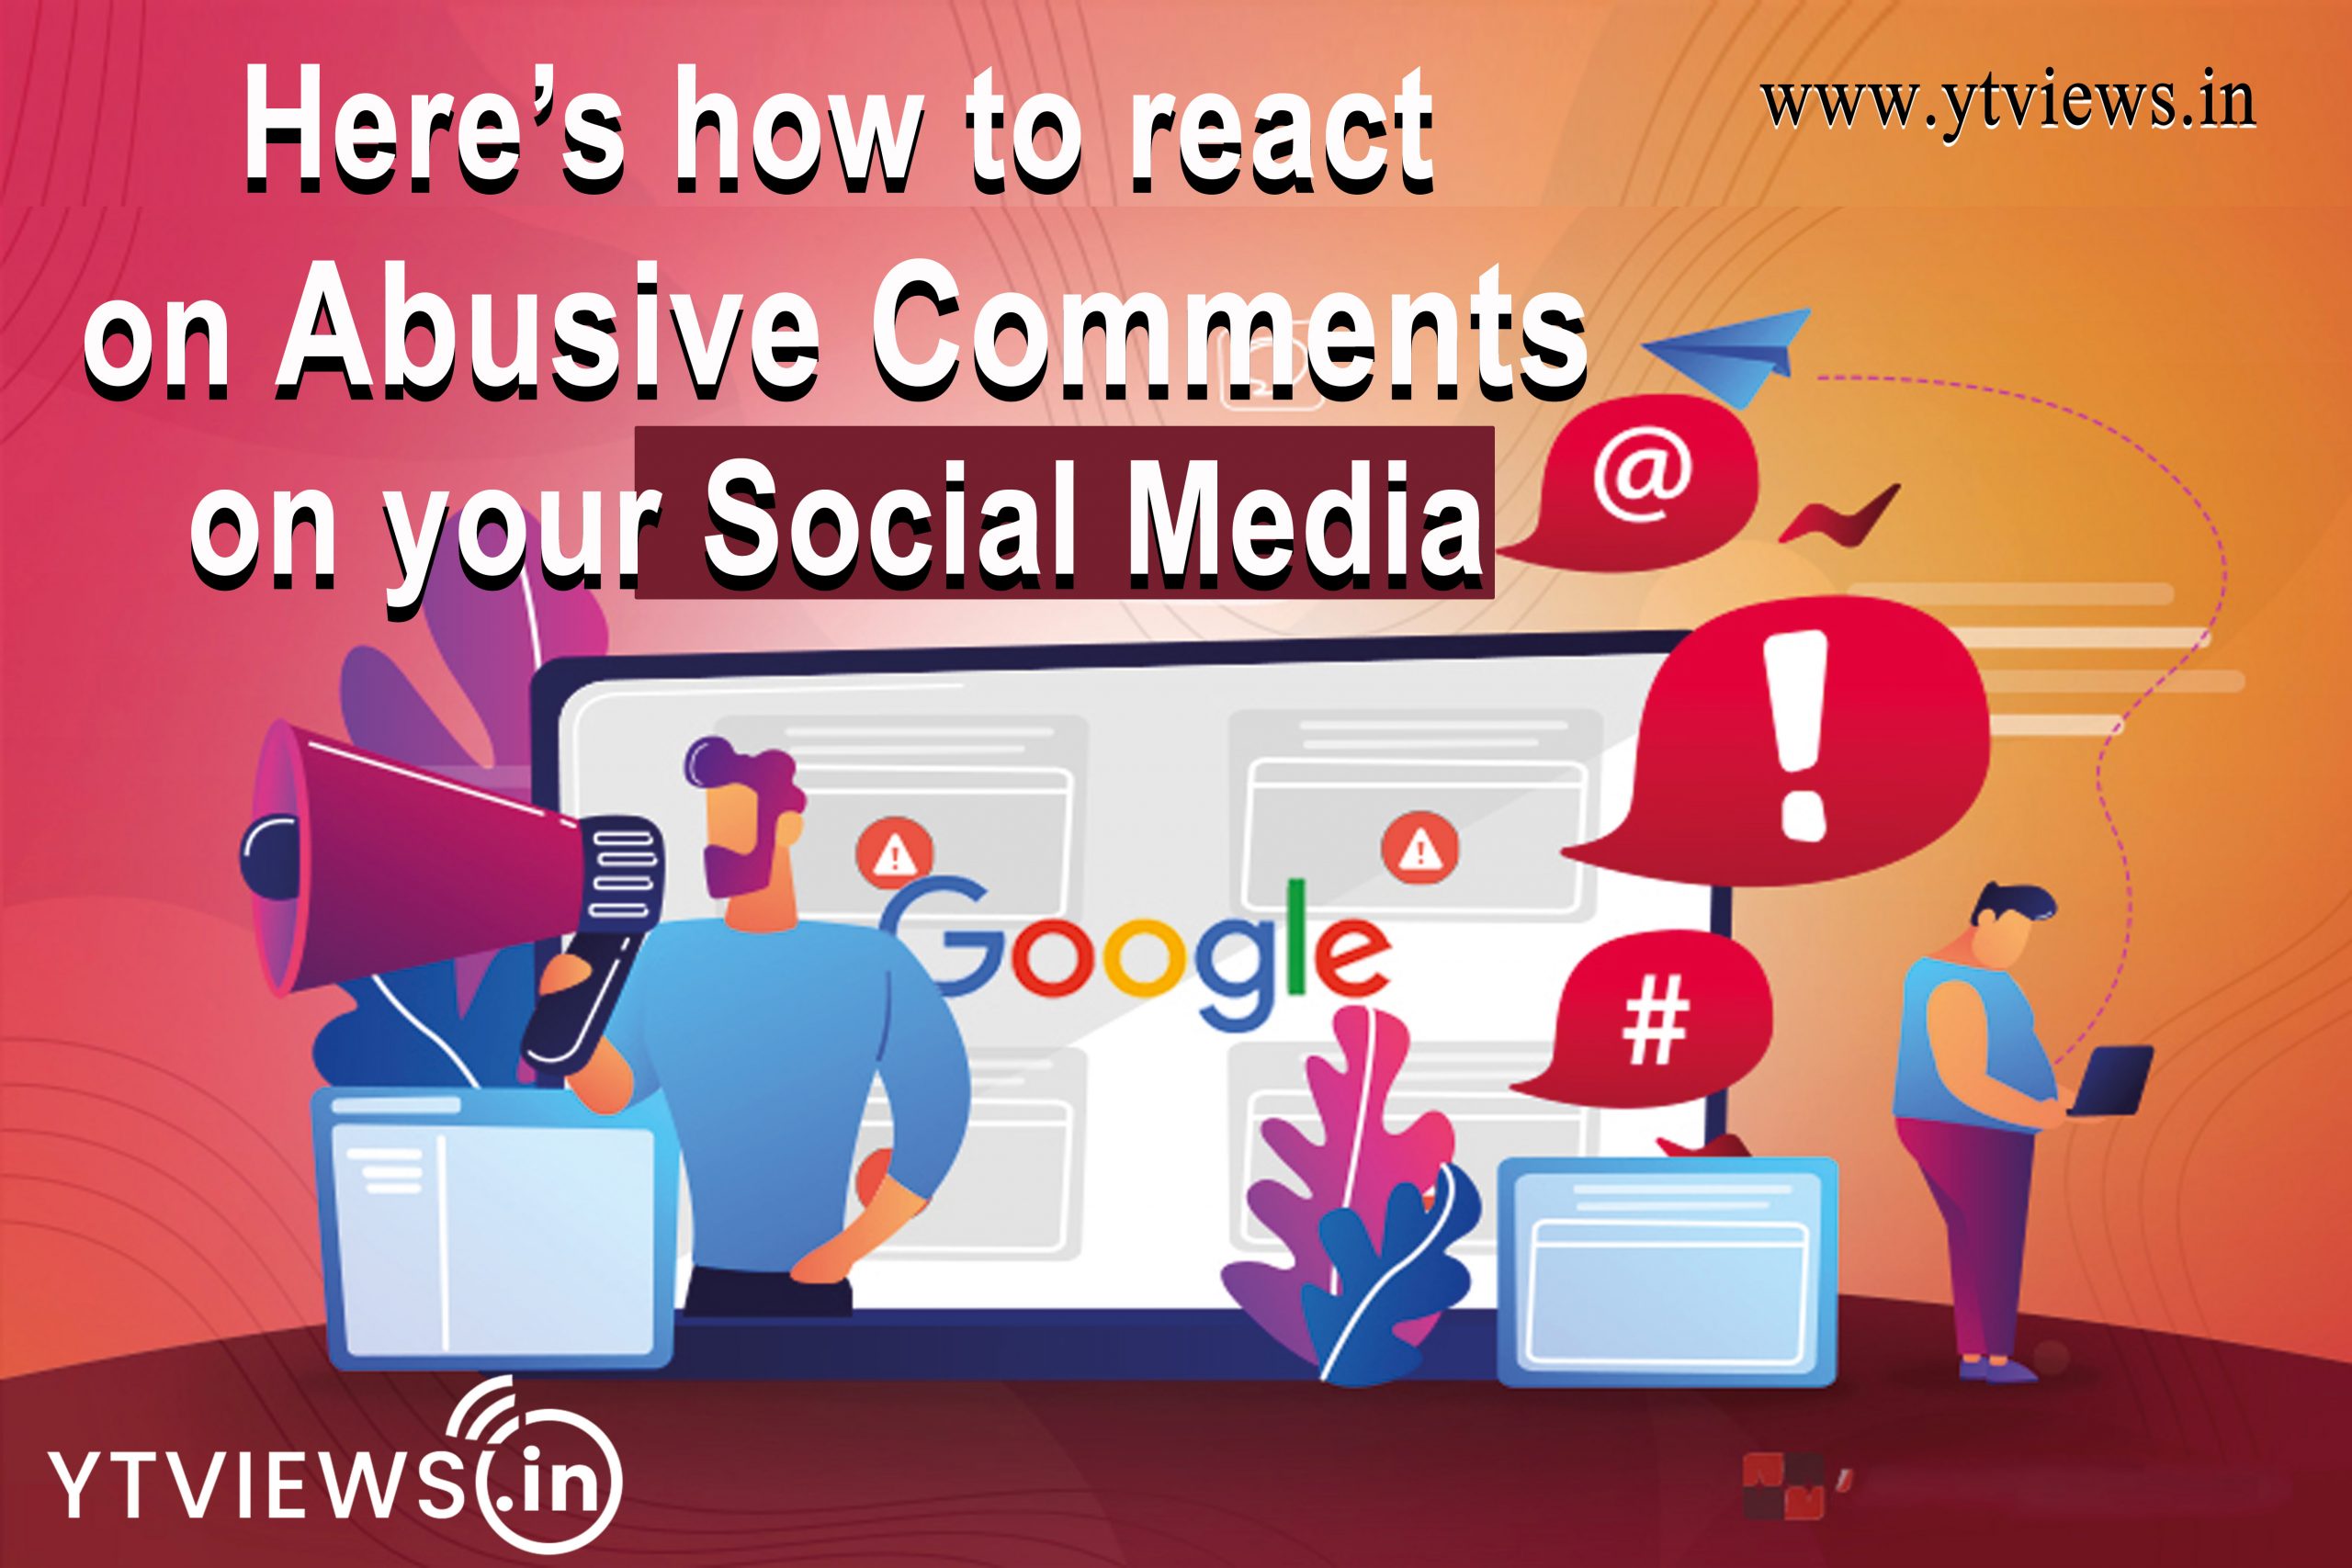 Here’s how to react on abusive comments on your social media | YTVIEWS.IN